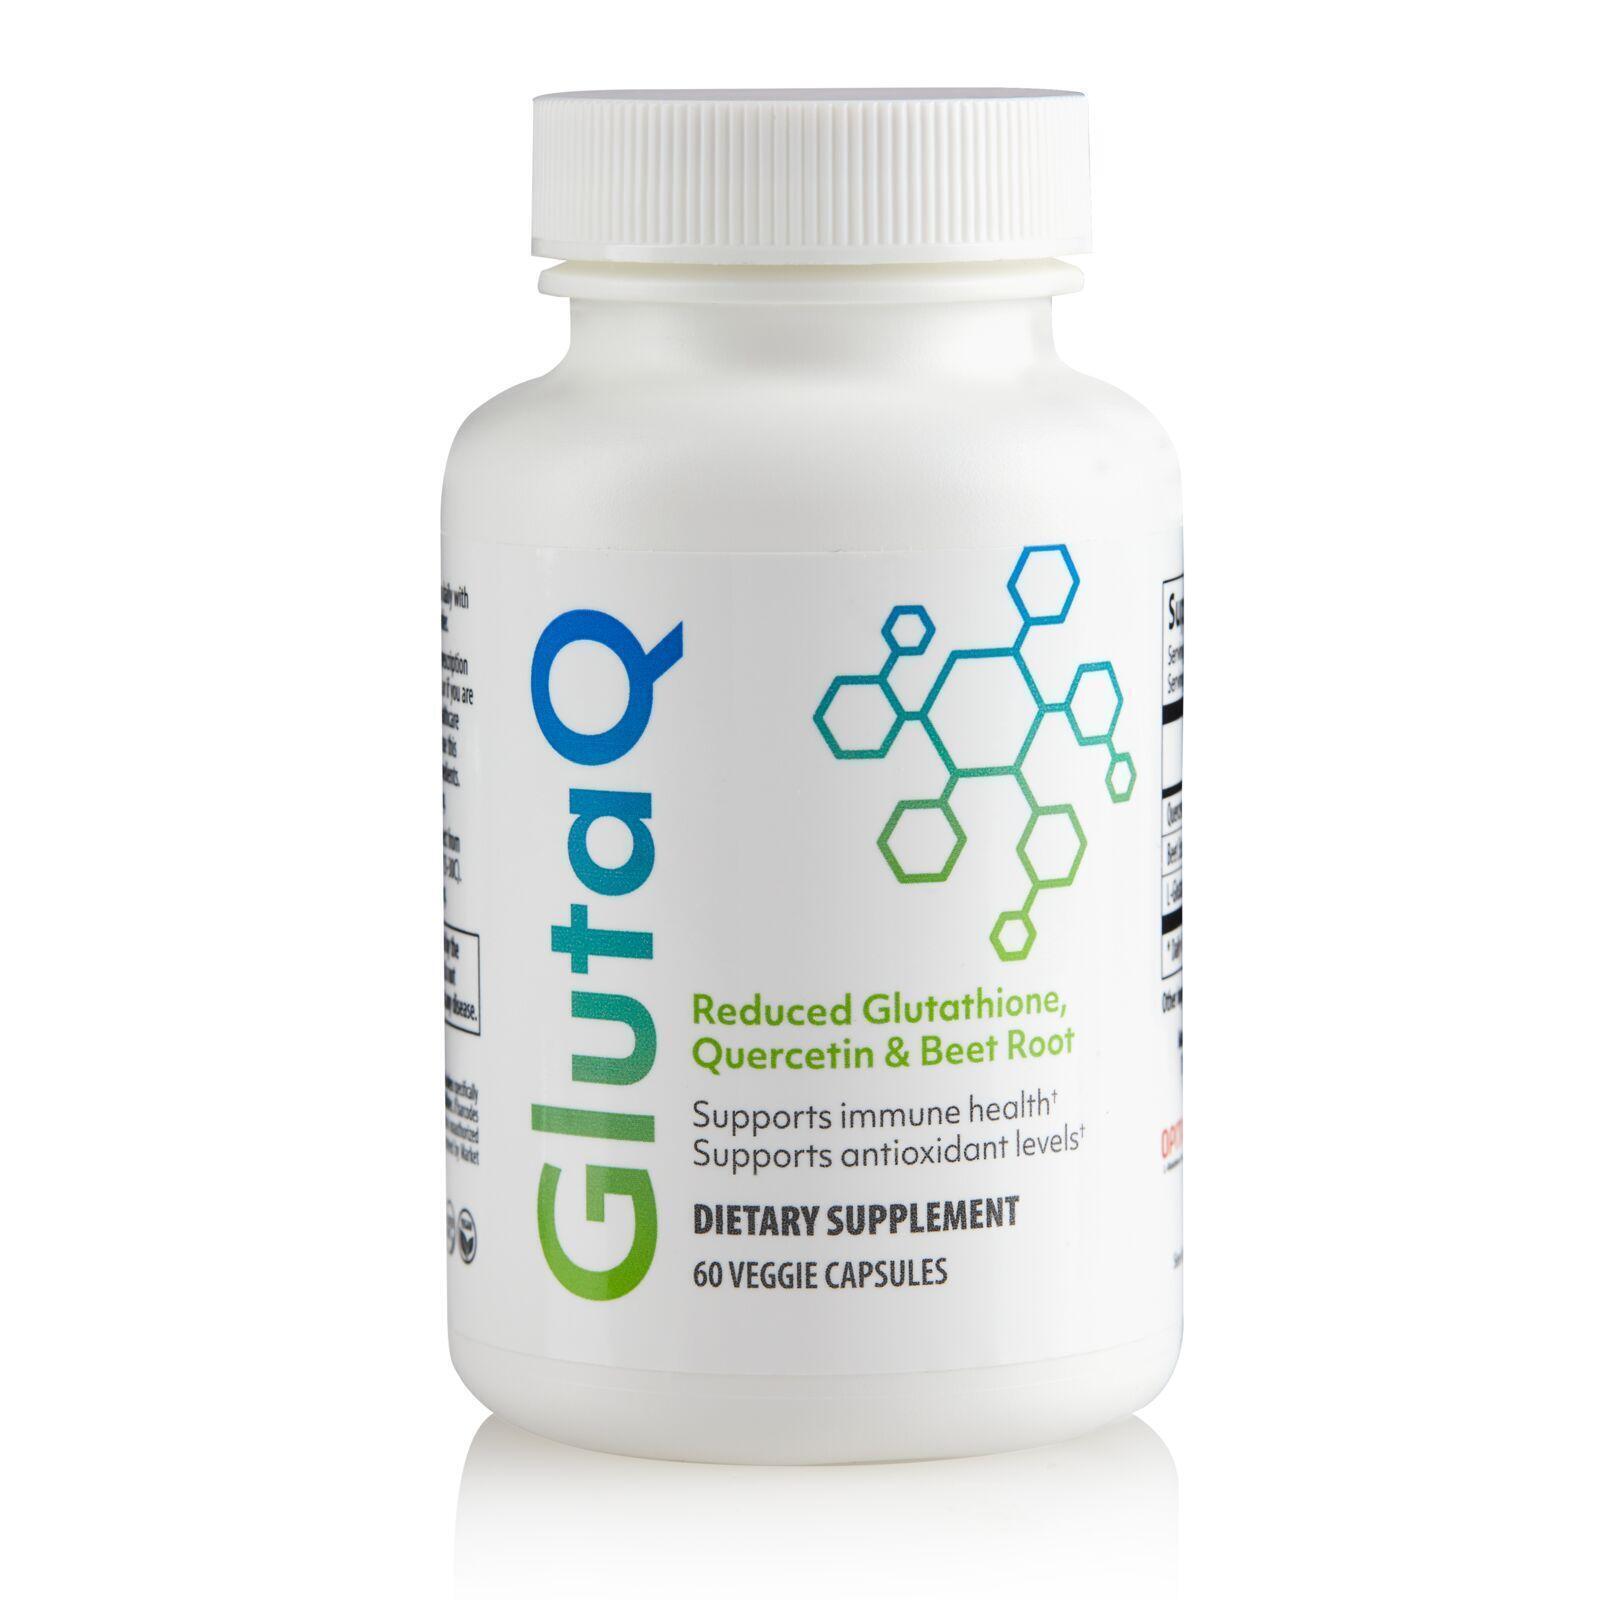 Purchase GlutaQ - Reduced Glutathione, Quercetin and Beet Root